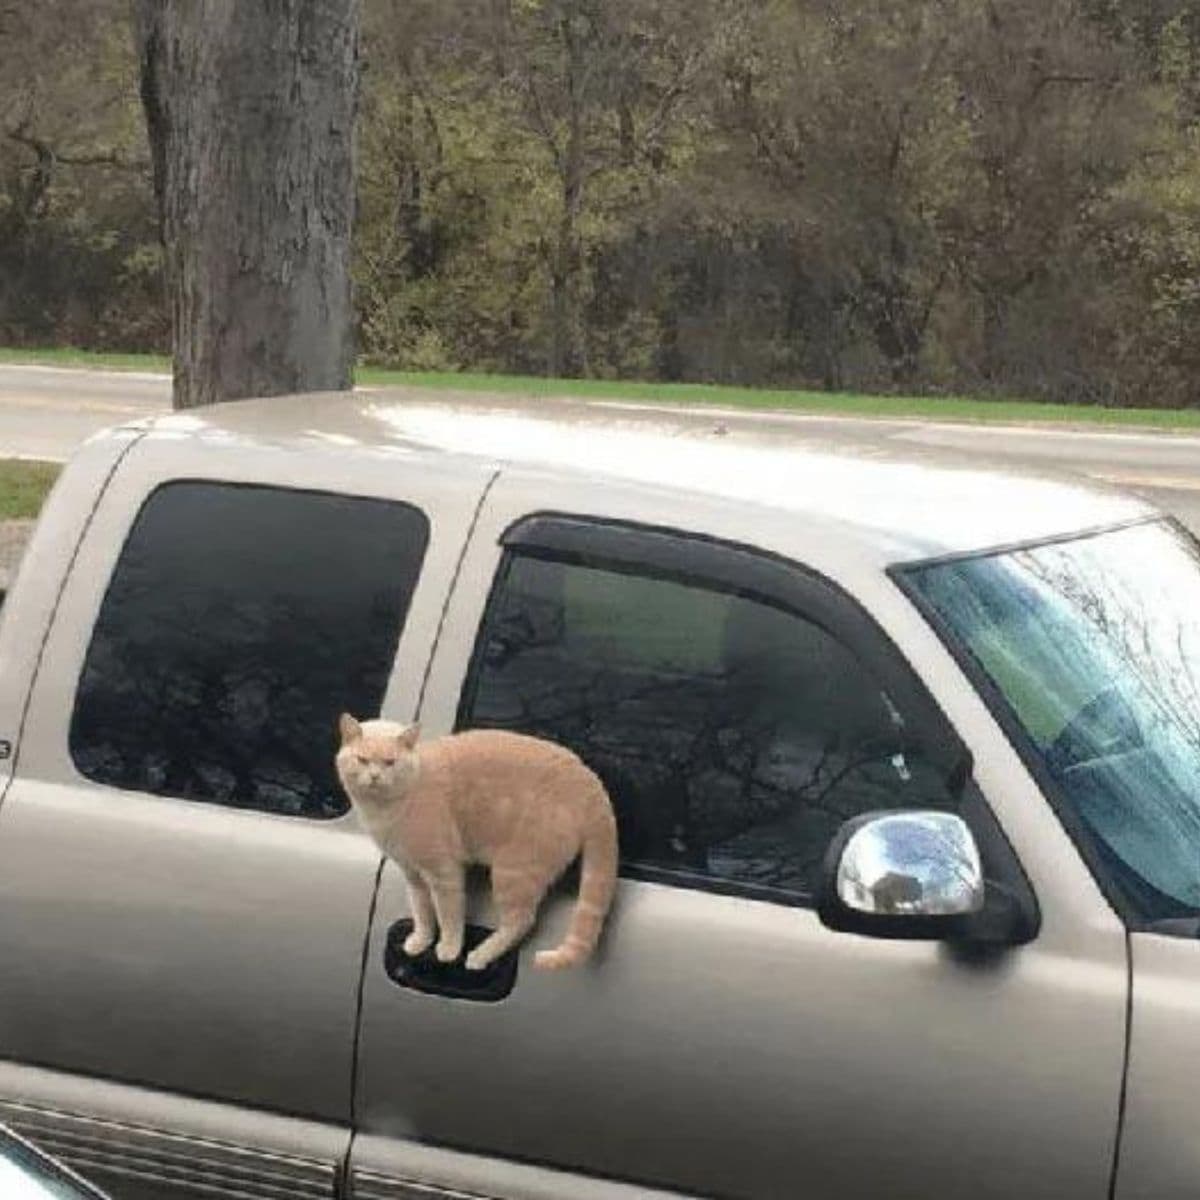 Cat standing on car with magic